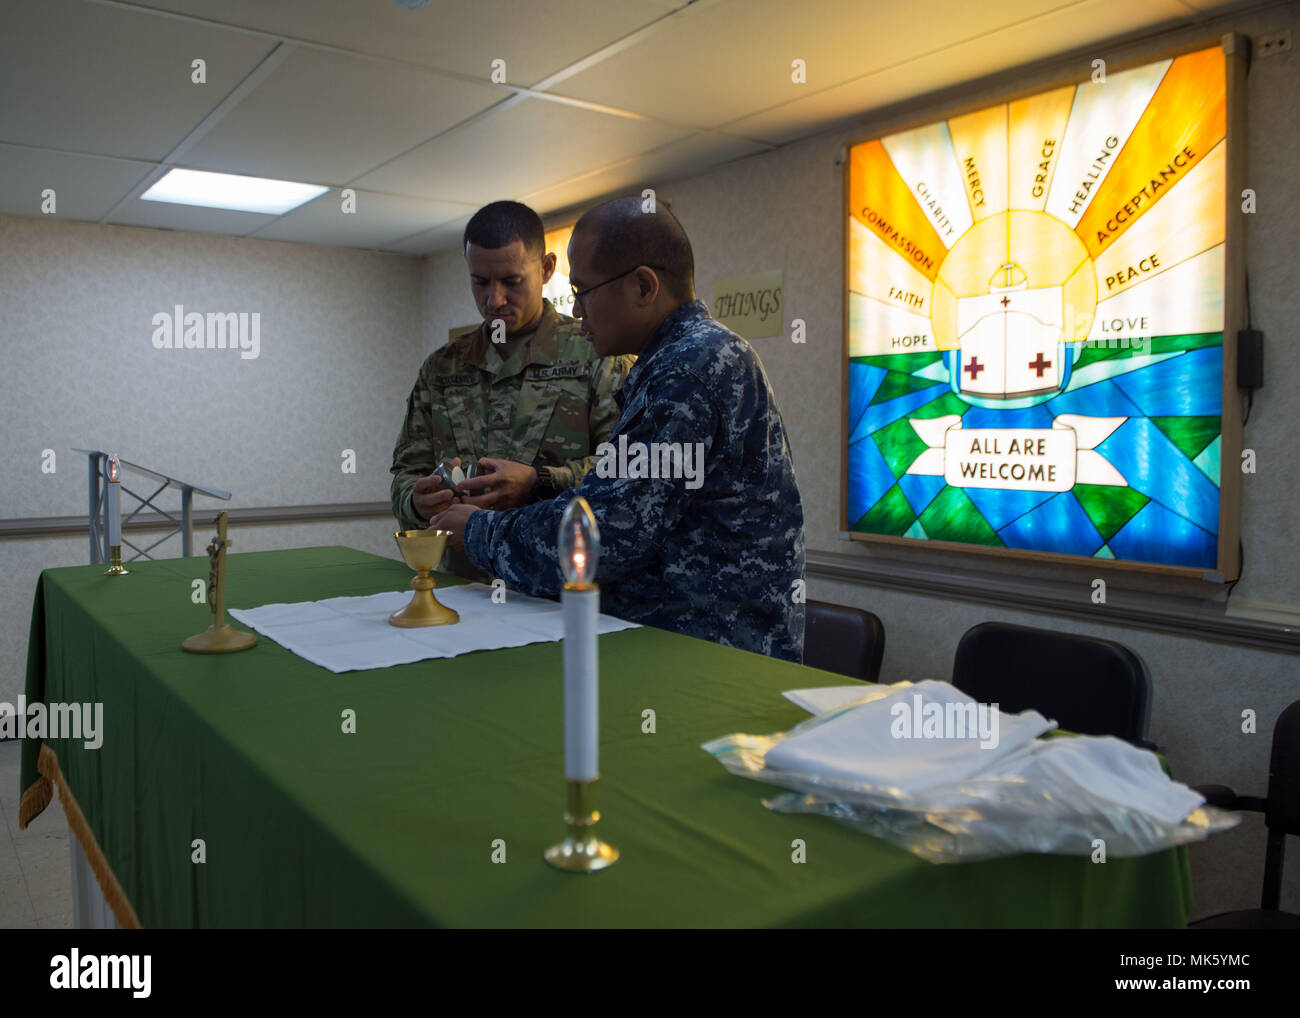 171109-N-MU198-001 SAN JUAN, Puerto Rico (Nov. 9, 2017) Religious Program Specialist 1st Class Adonis Albia (right) and Sgt. Juan Rios prepare the chapel aboard the Military Sealift Command hospital ship USNS Comfort (T-AH 20) for Catholic mass. Comfort is moored pier side in San Juan, Puerto Rico, to provide humanitarian relief. The Department of Defense is supporting the Federal Emergency Management Agency, the lead federal agency, in helping those affected by Hurricane Maria to minimize suffering and is one component of the overall whole-of-government response effort. (U.S. Navy photo by Ma Stock Photo